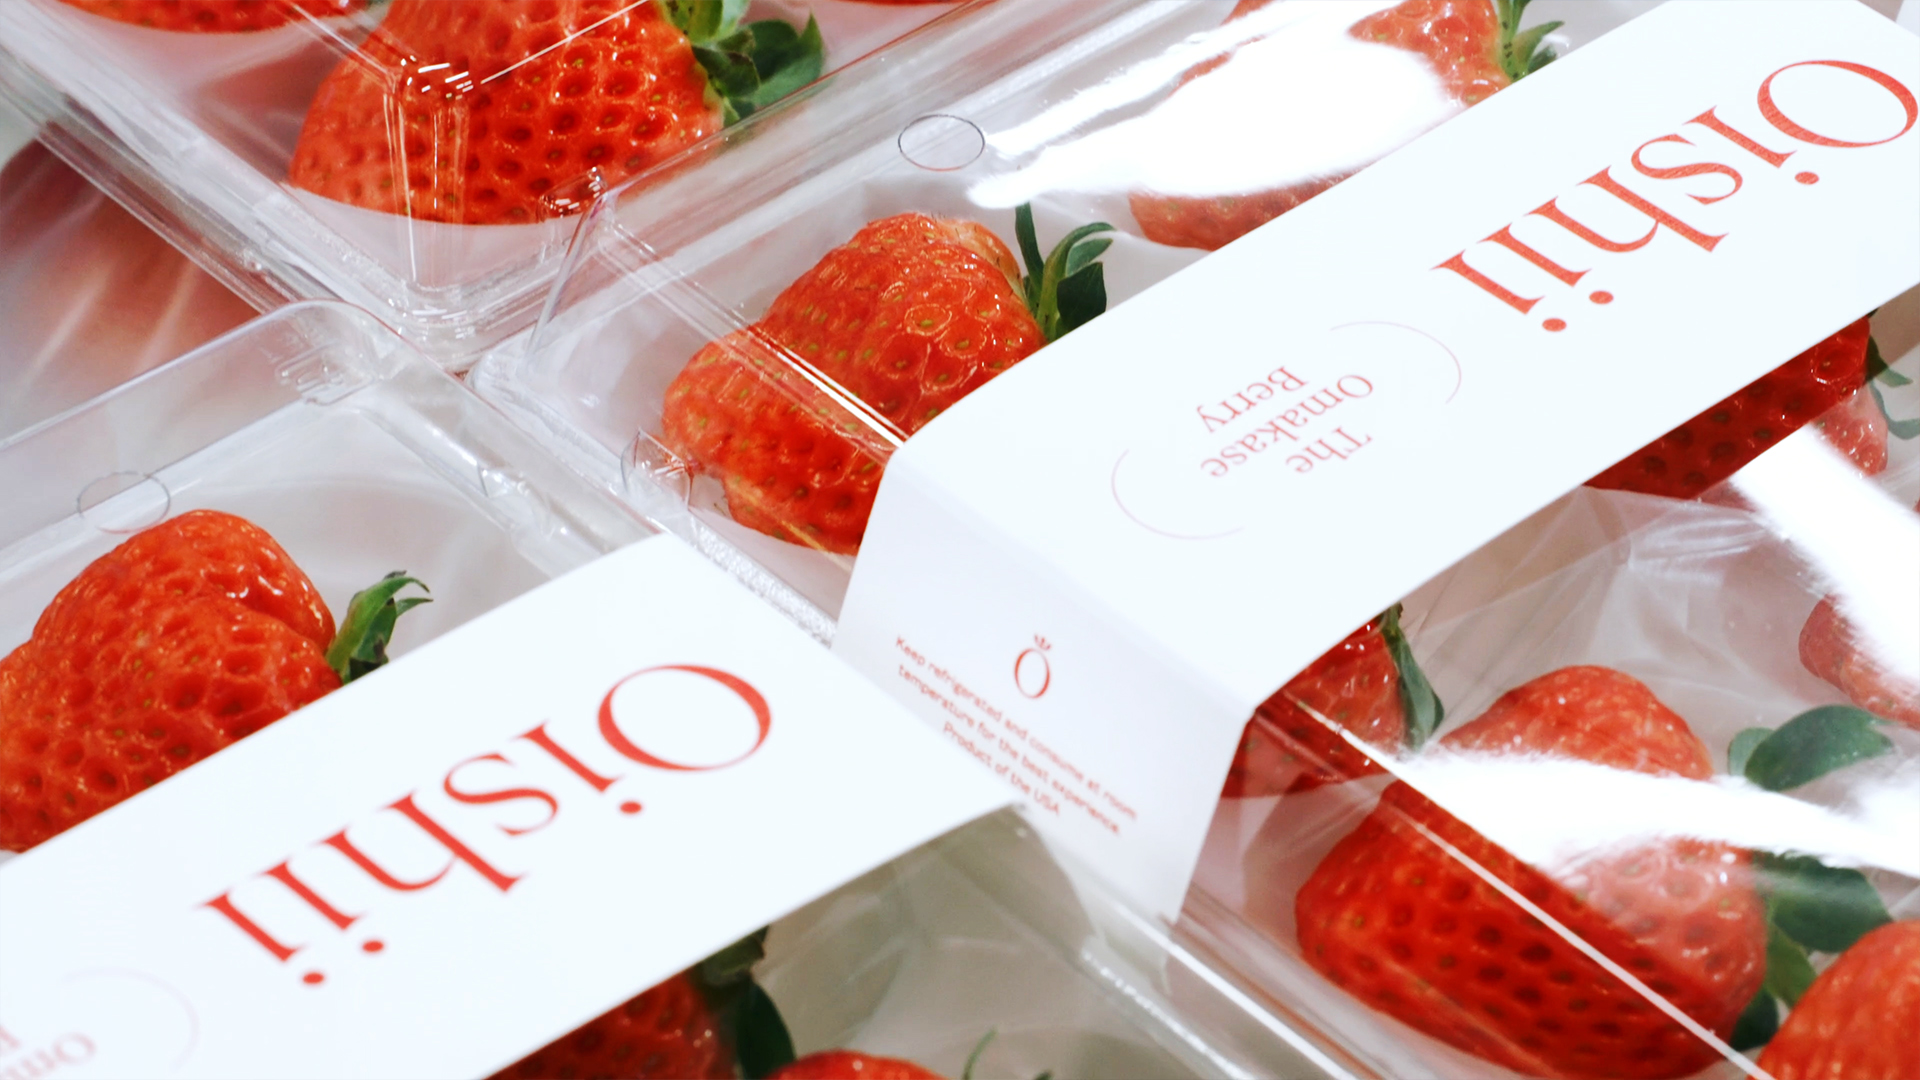 Strawberries, from upscale brand Oishii, are strewn out on a table in fancy branded packaging.